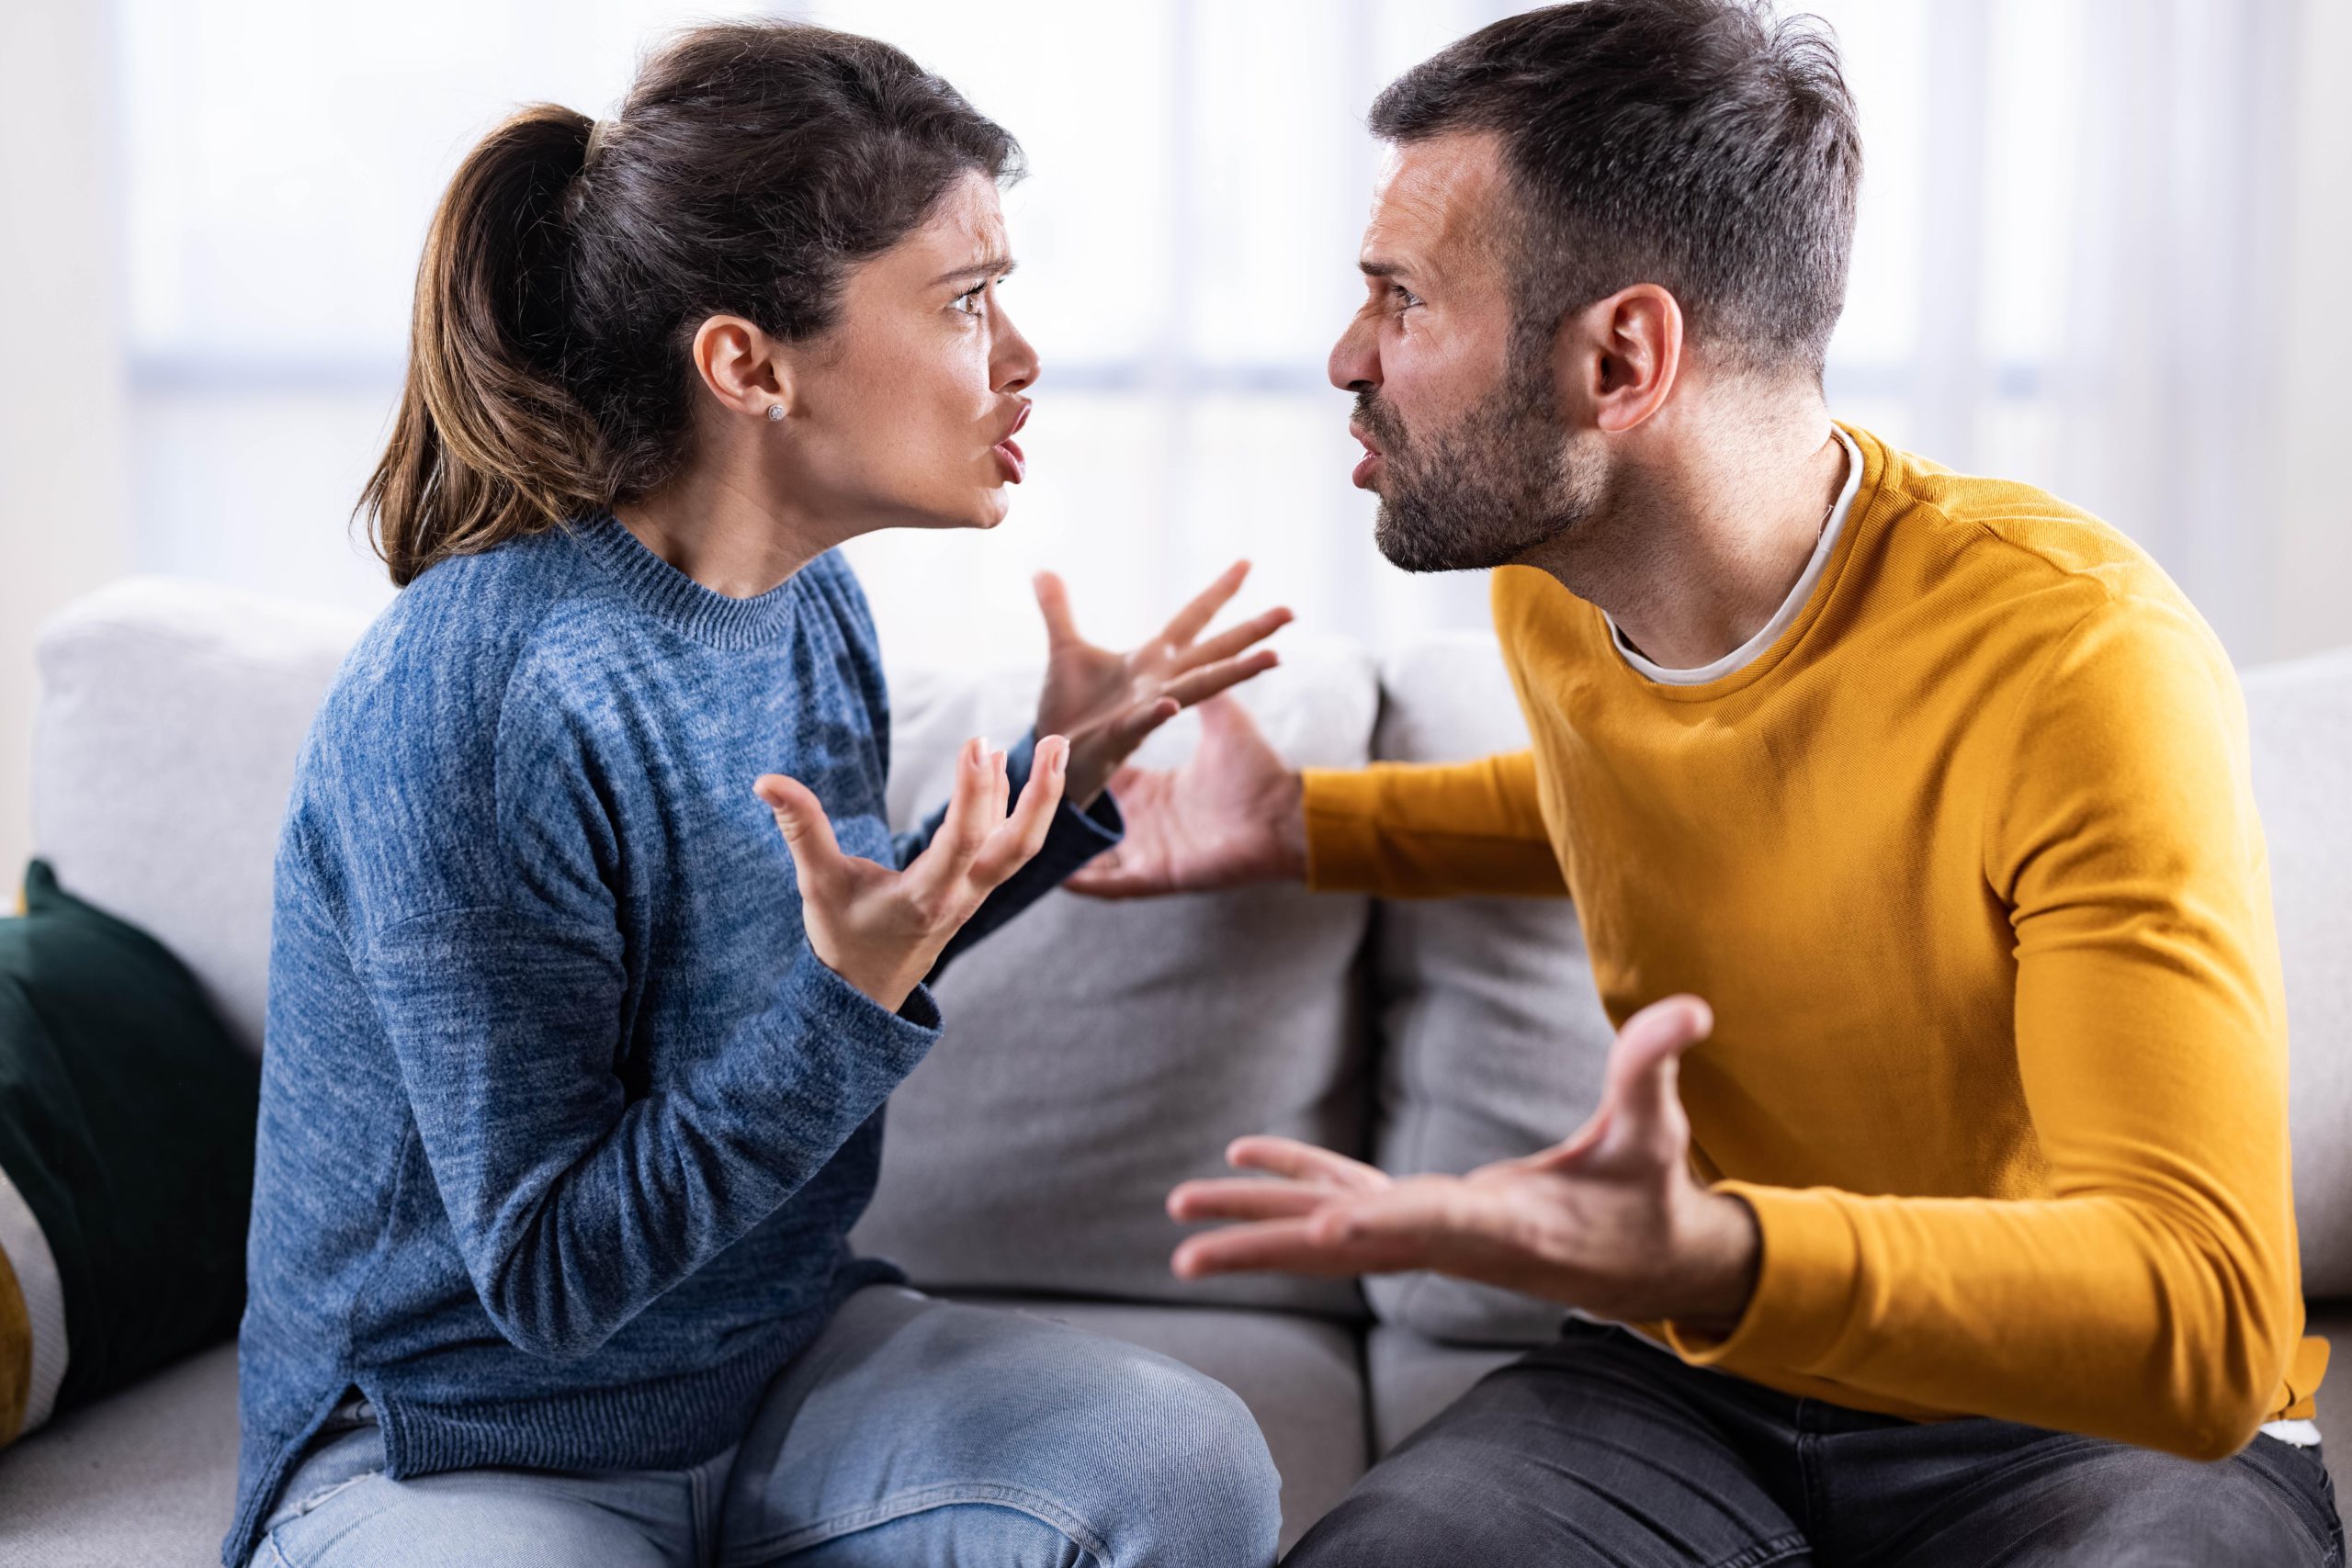 controlling wife, The Struggle of Living with a Controlling Wife: How to Find Balance and Maintain Mental Health